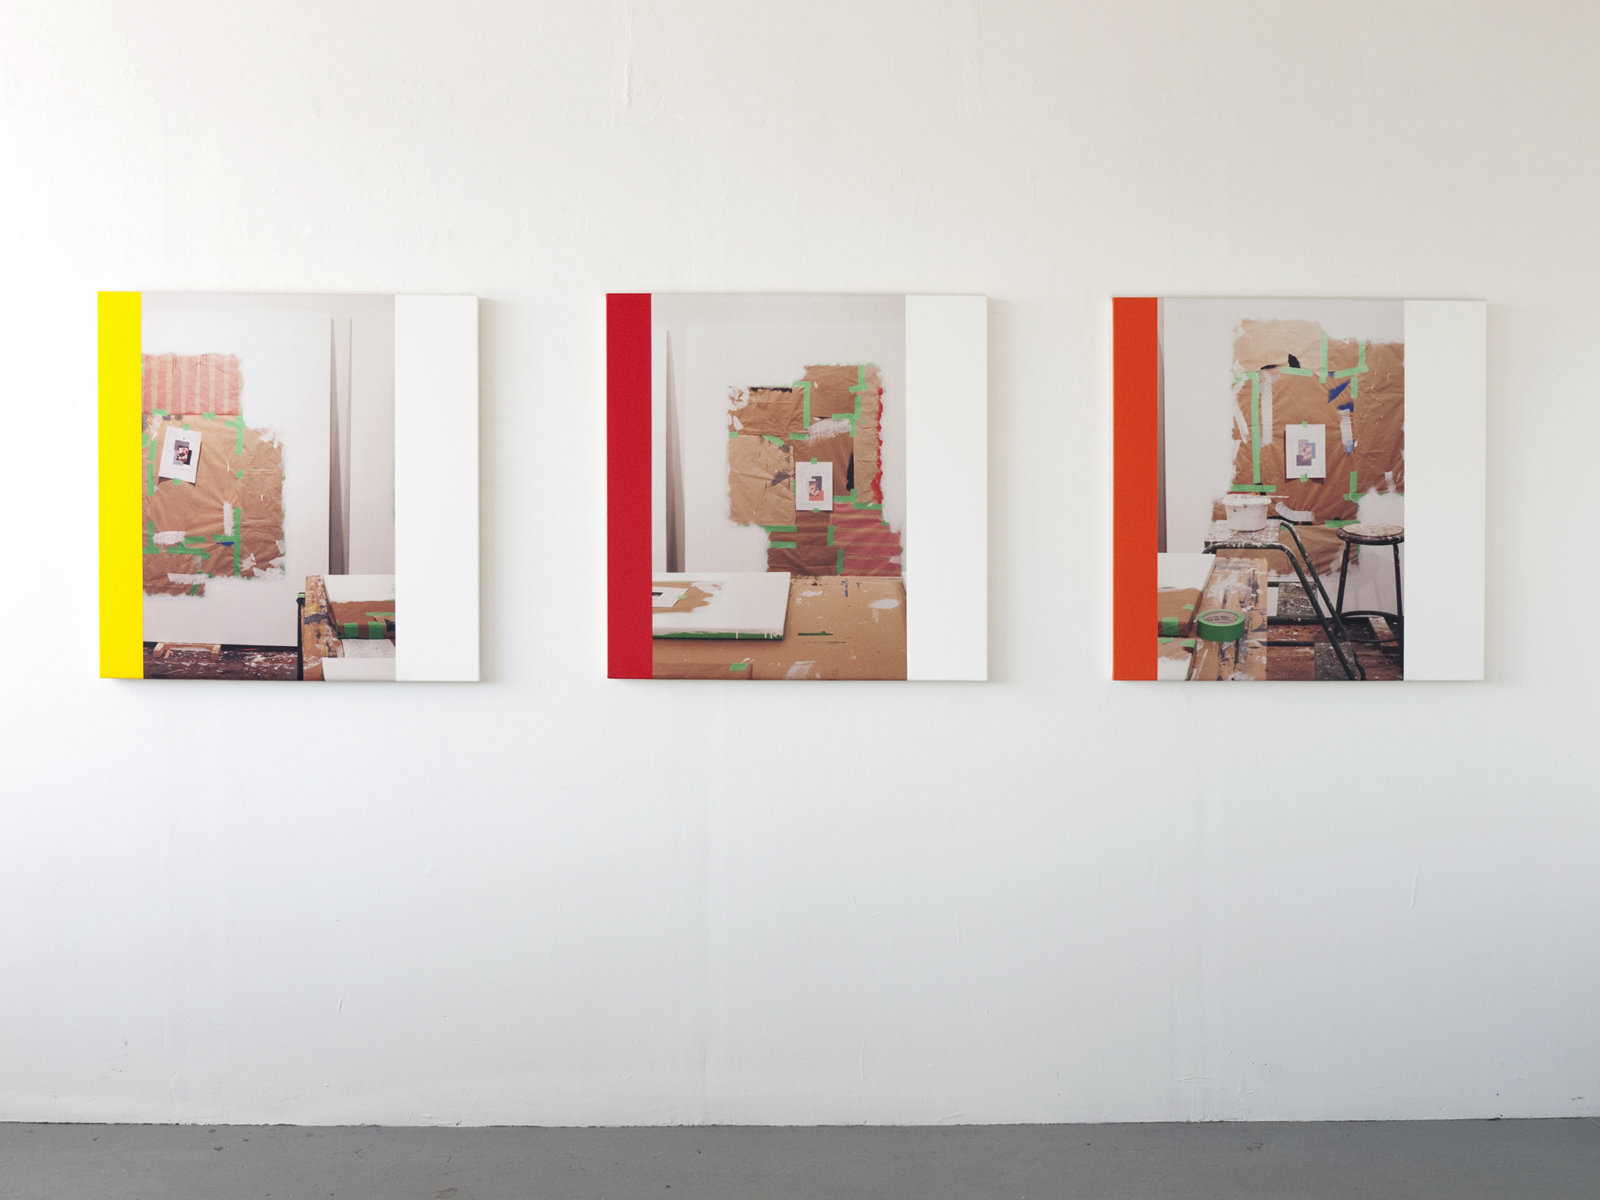 Ian Wallace, Abstract Composition (The Whites I–III), 2012, photolaminate with acrylic on canvas, each 36 x 36 in. (91 x 91 cm)